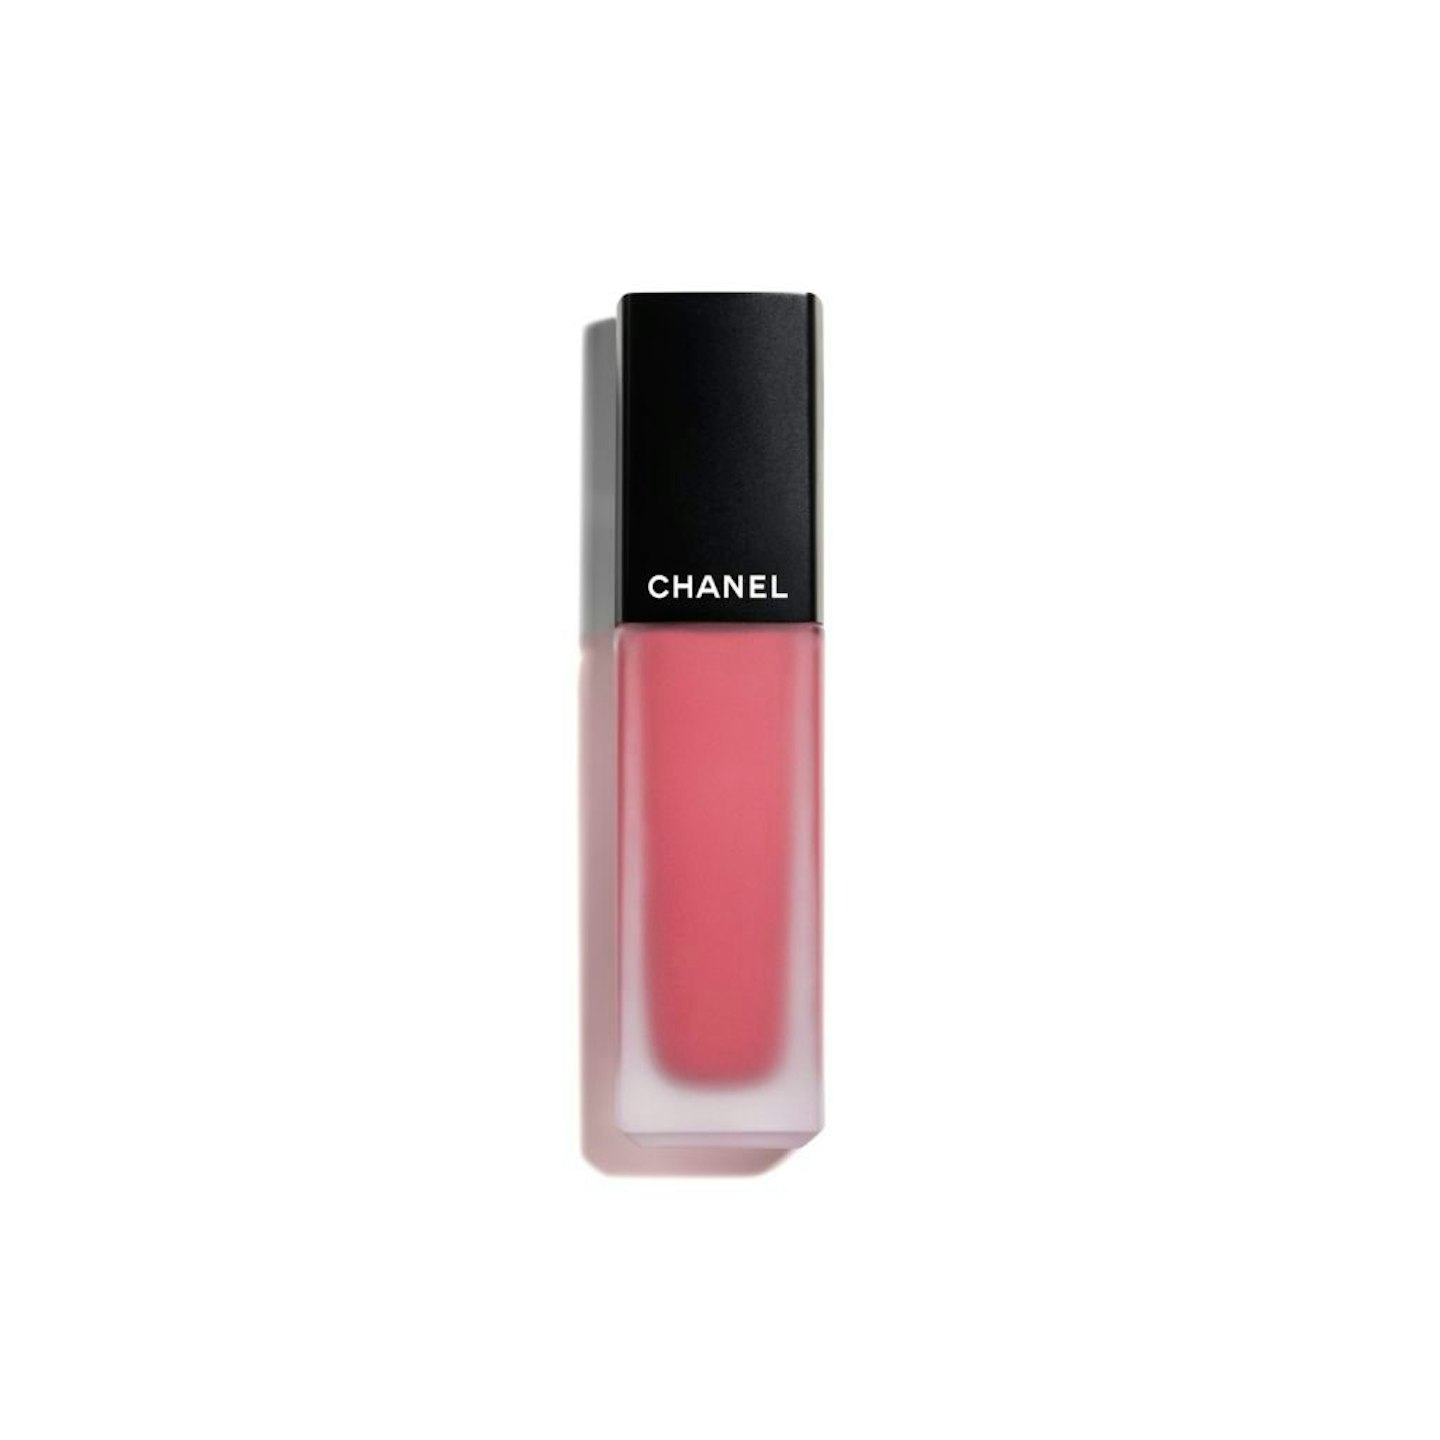 Chanel, Rouge Allure Ink Fusion in 806 Pink Brown, £31